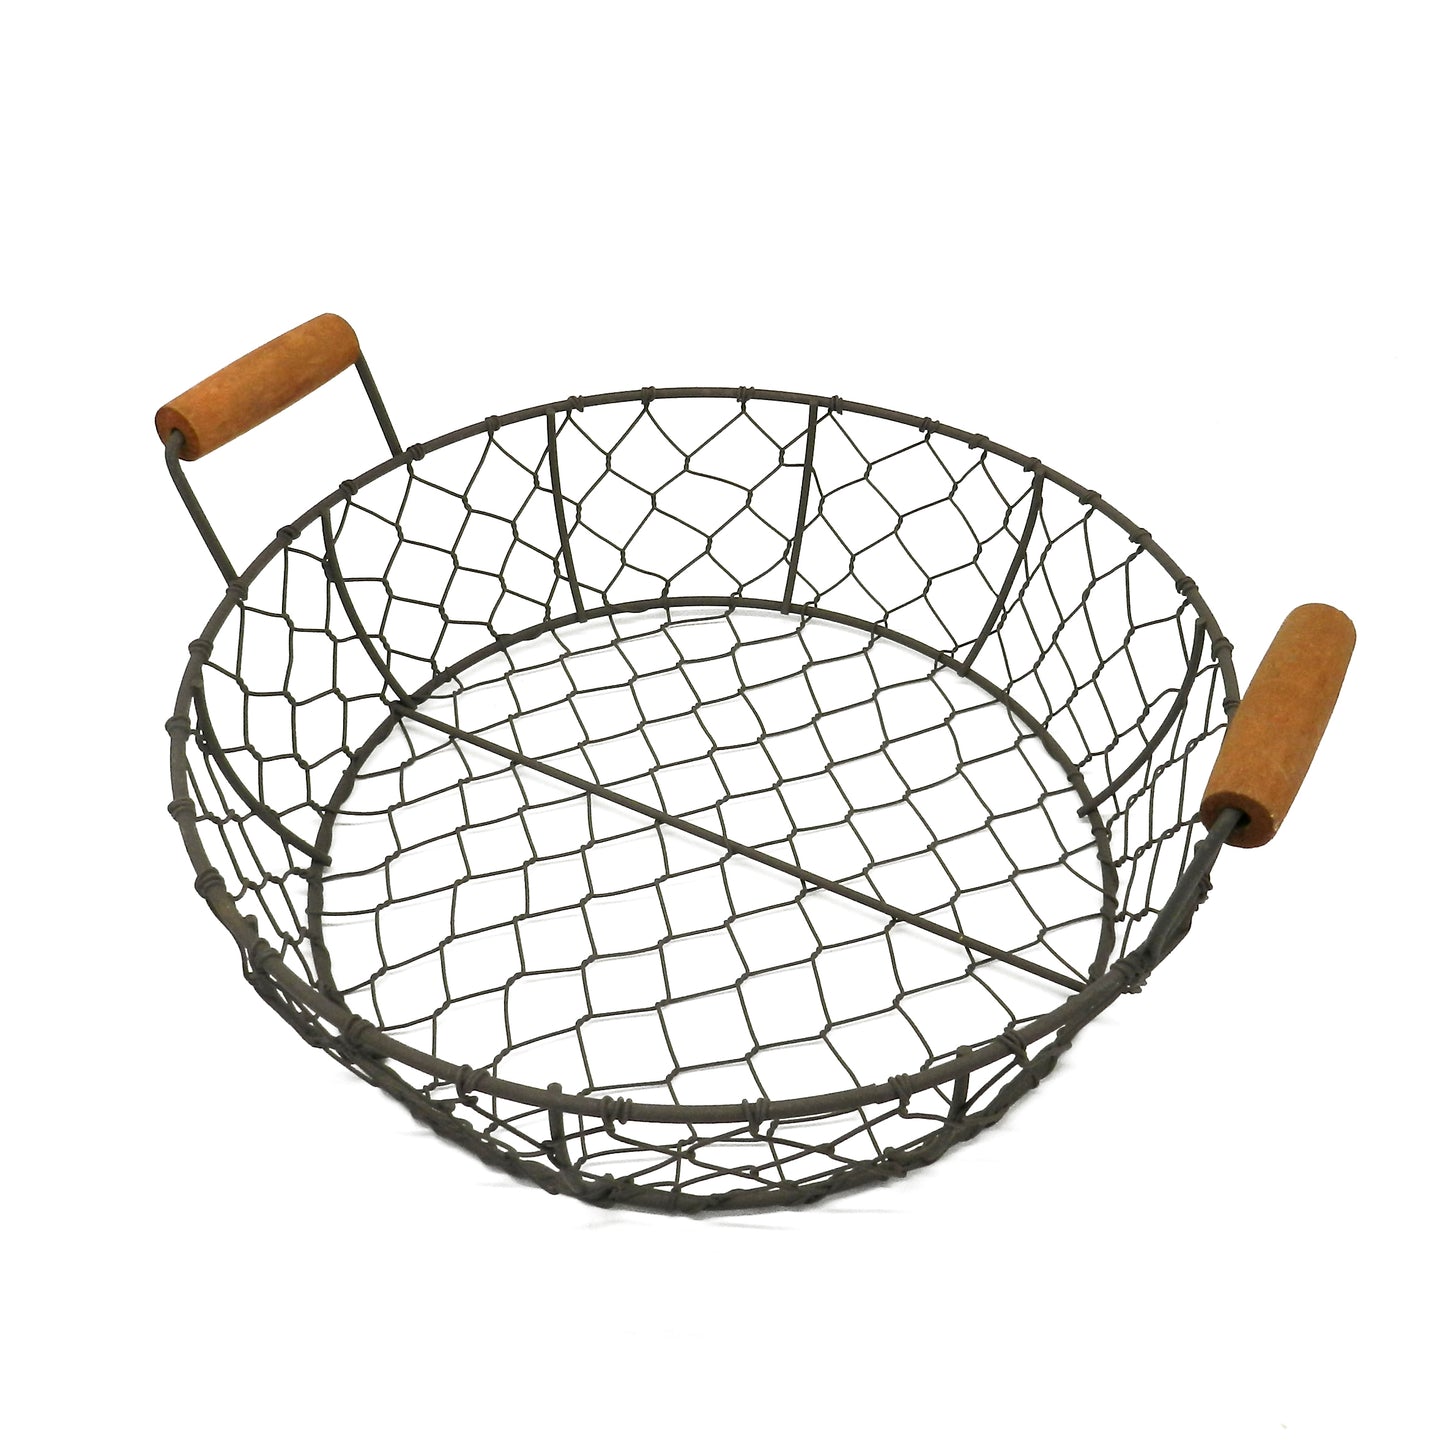 CVHOMEDECO. Round Metal Wire Fruit tray Chicken Wire Tray with Wooden Handle Country Vintage Style Serving Tray. Rusty, Dia. 11.75 X 3.13 Inch